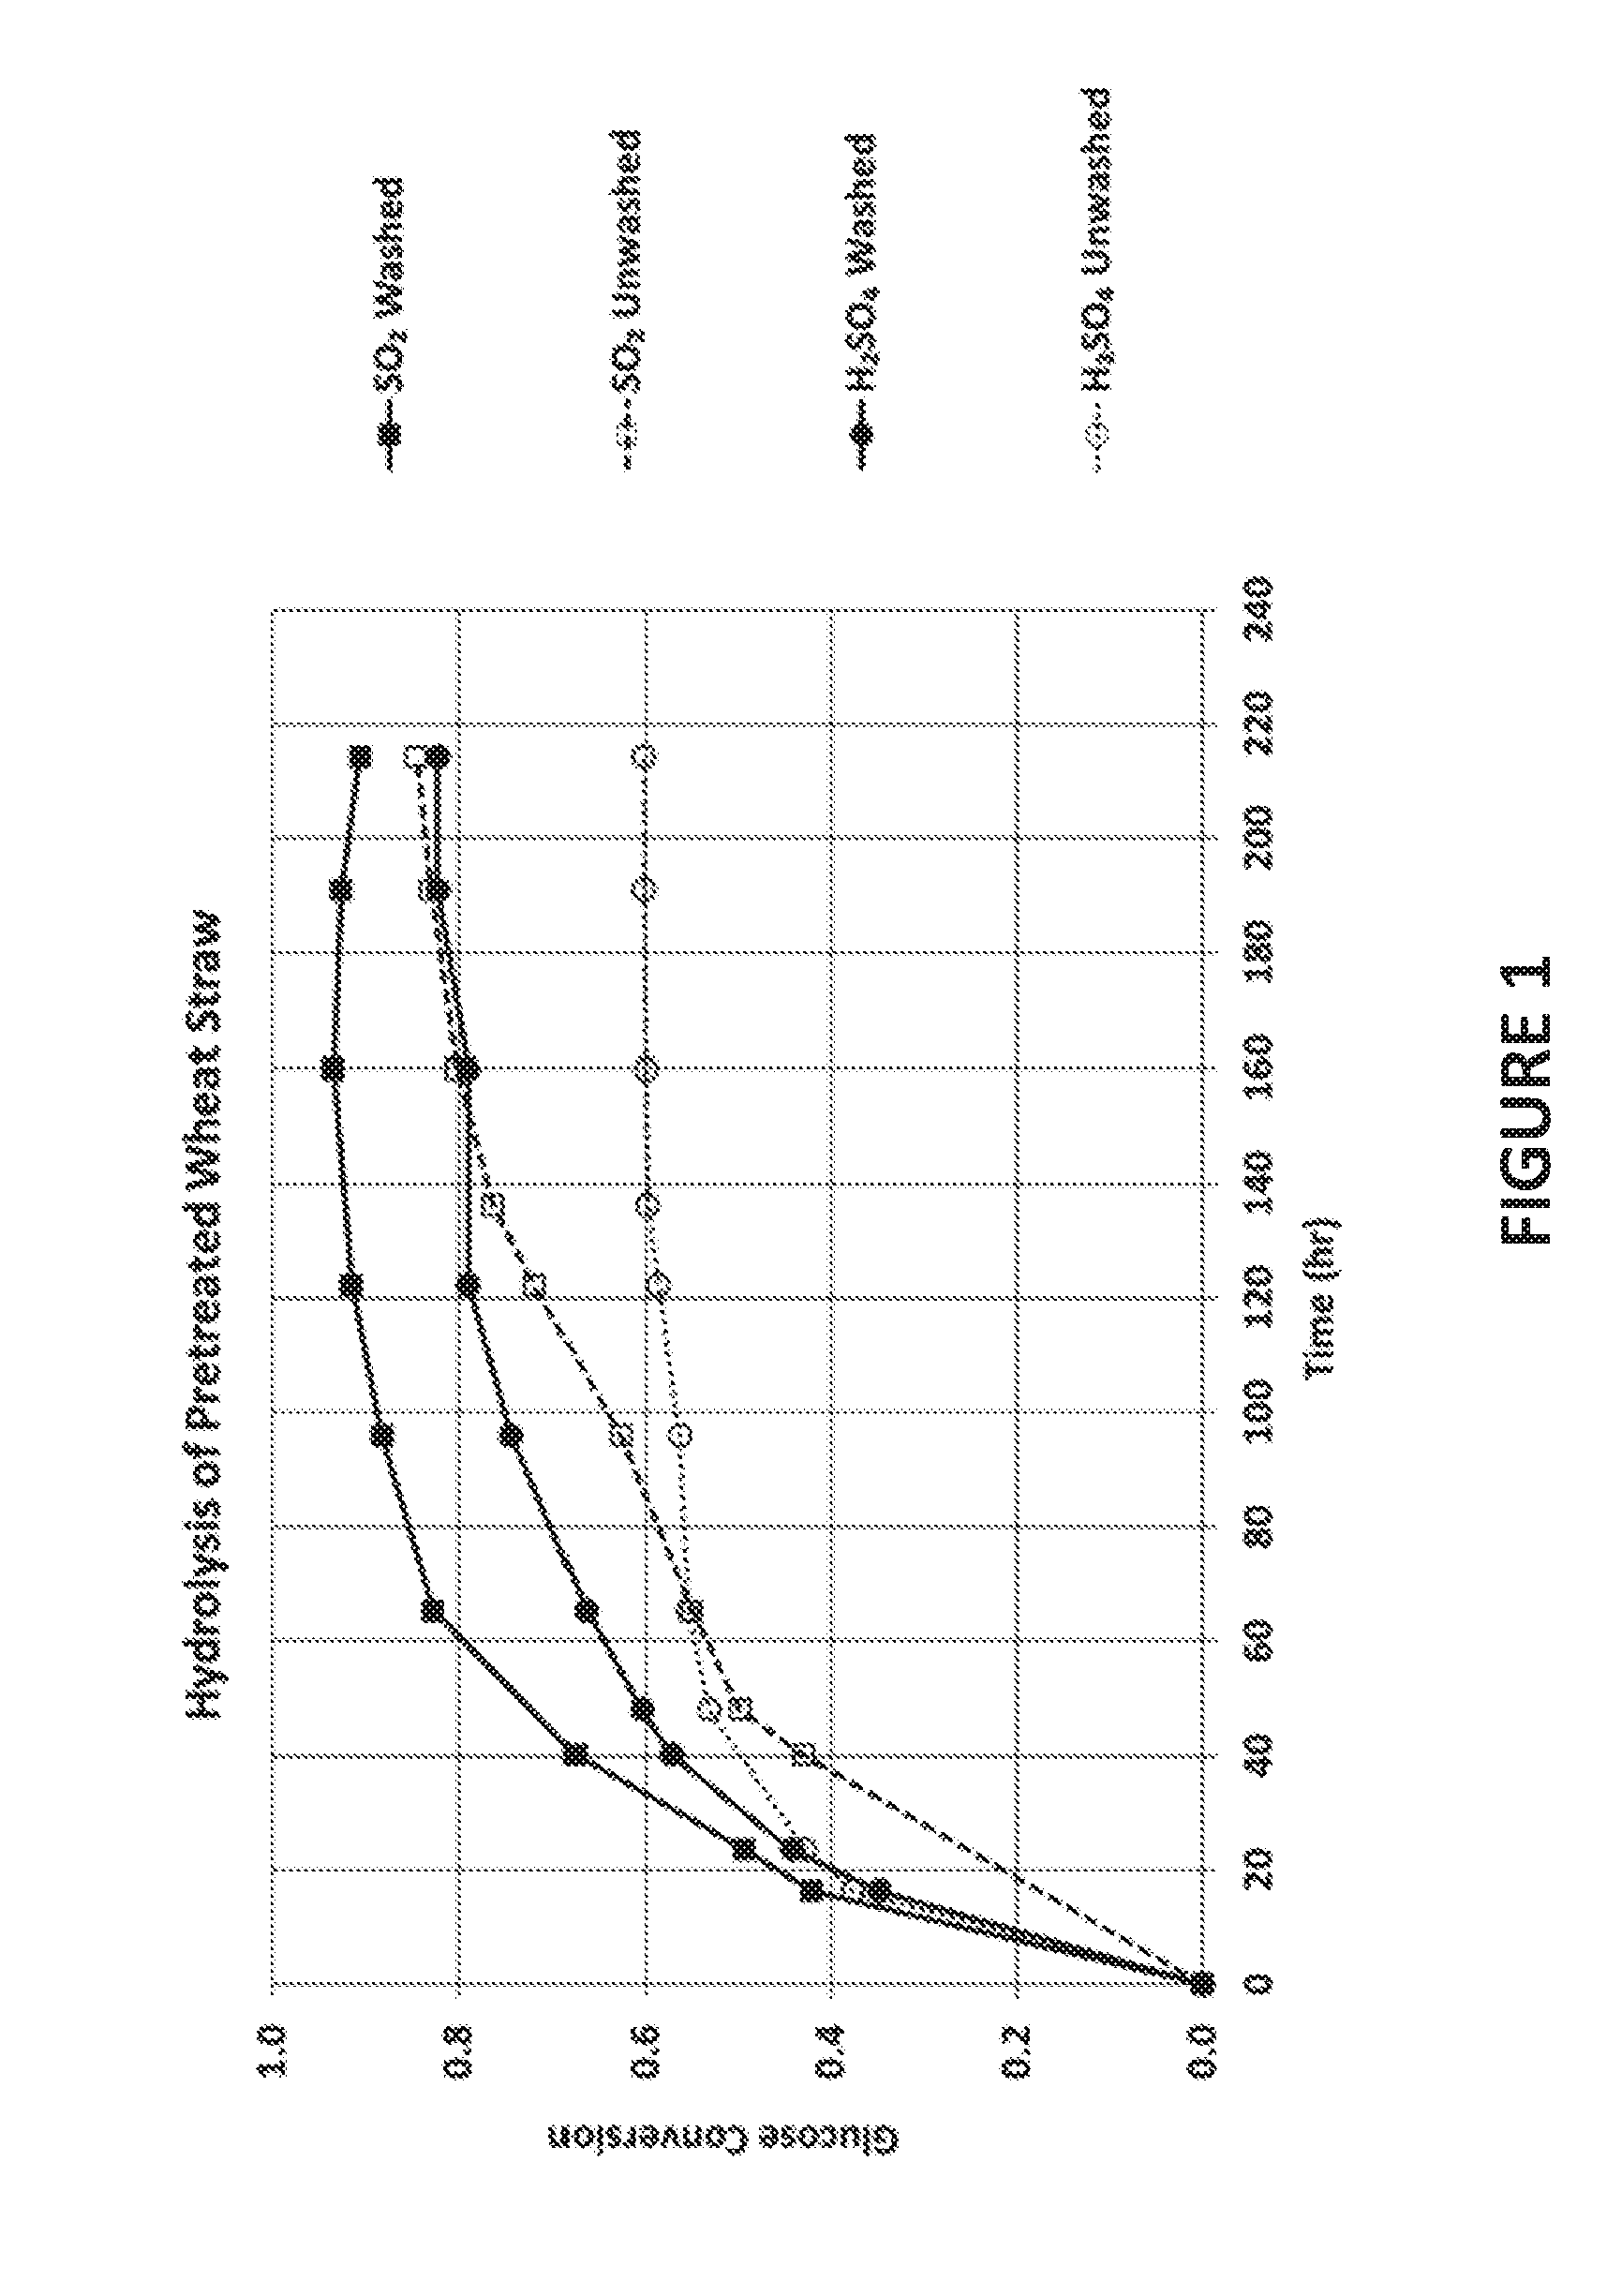 Process comprising sulfur dioxide and/or sulfurous acid pretreatment and enzymatic hydrolysis